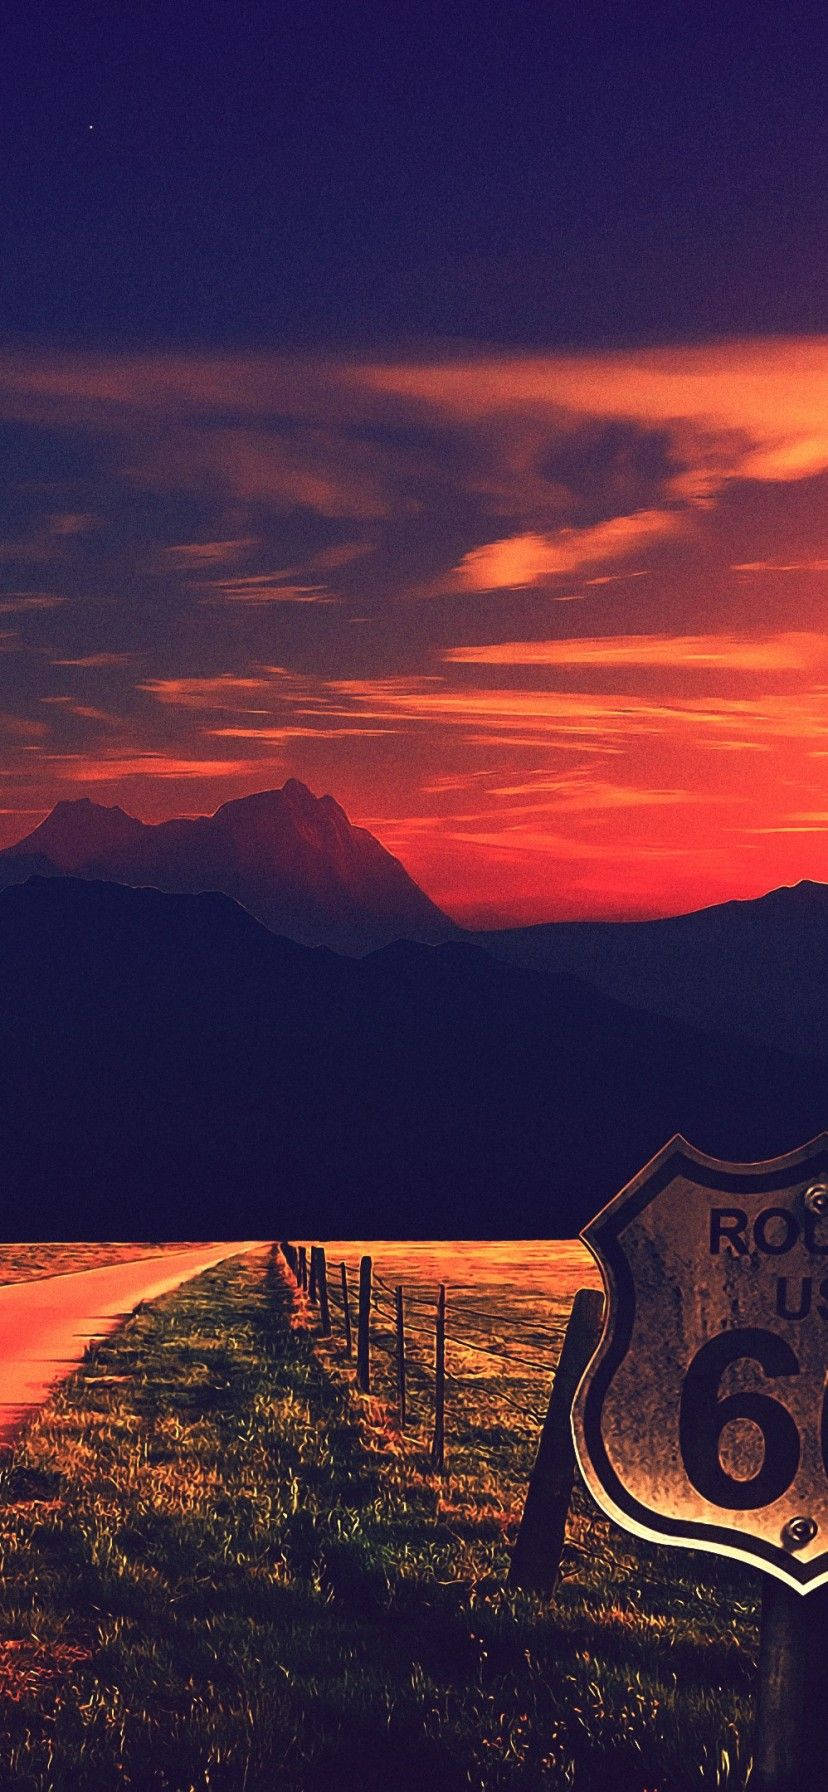 Enjoy Every Moment of the Beautiful Route 66 Sunset With Your iPhone XR Wallpaper